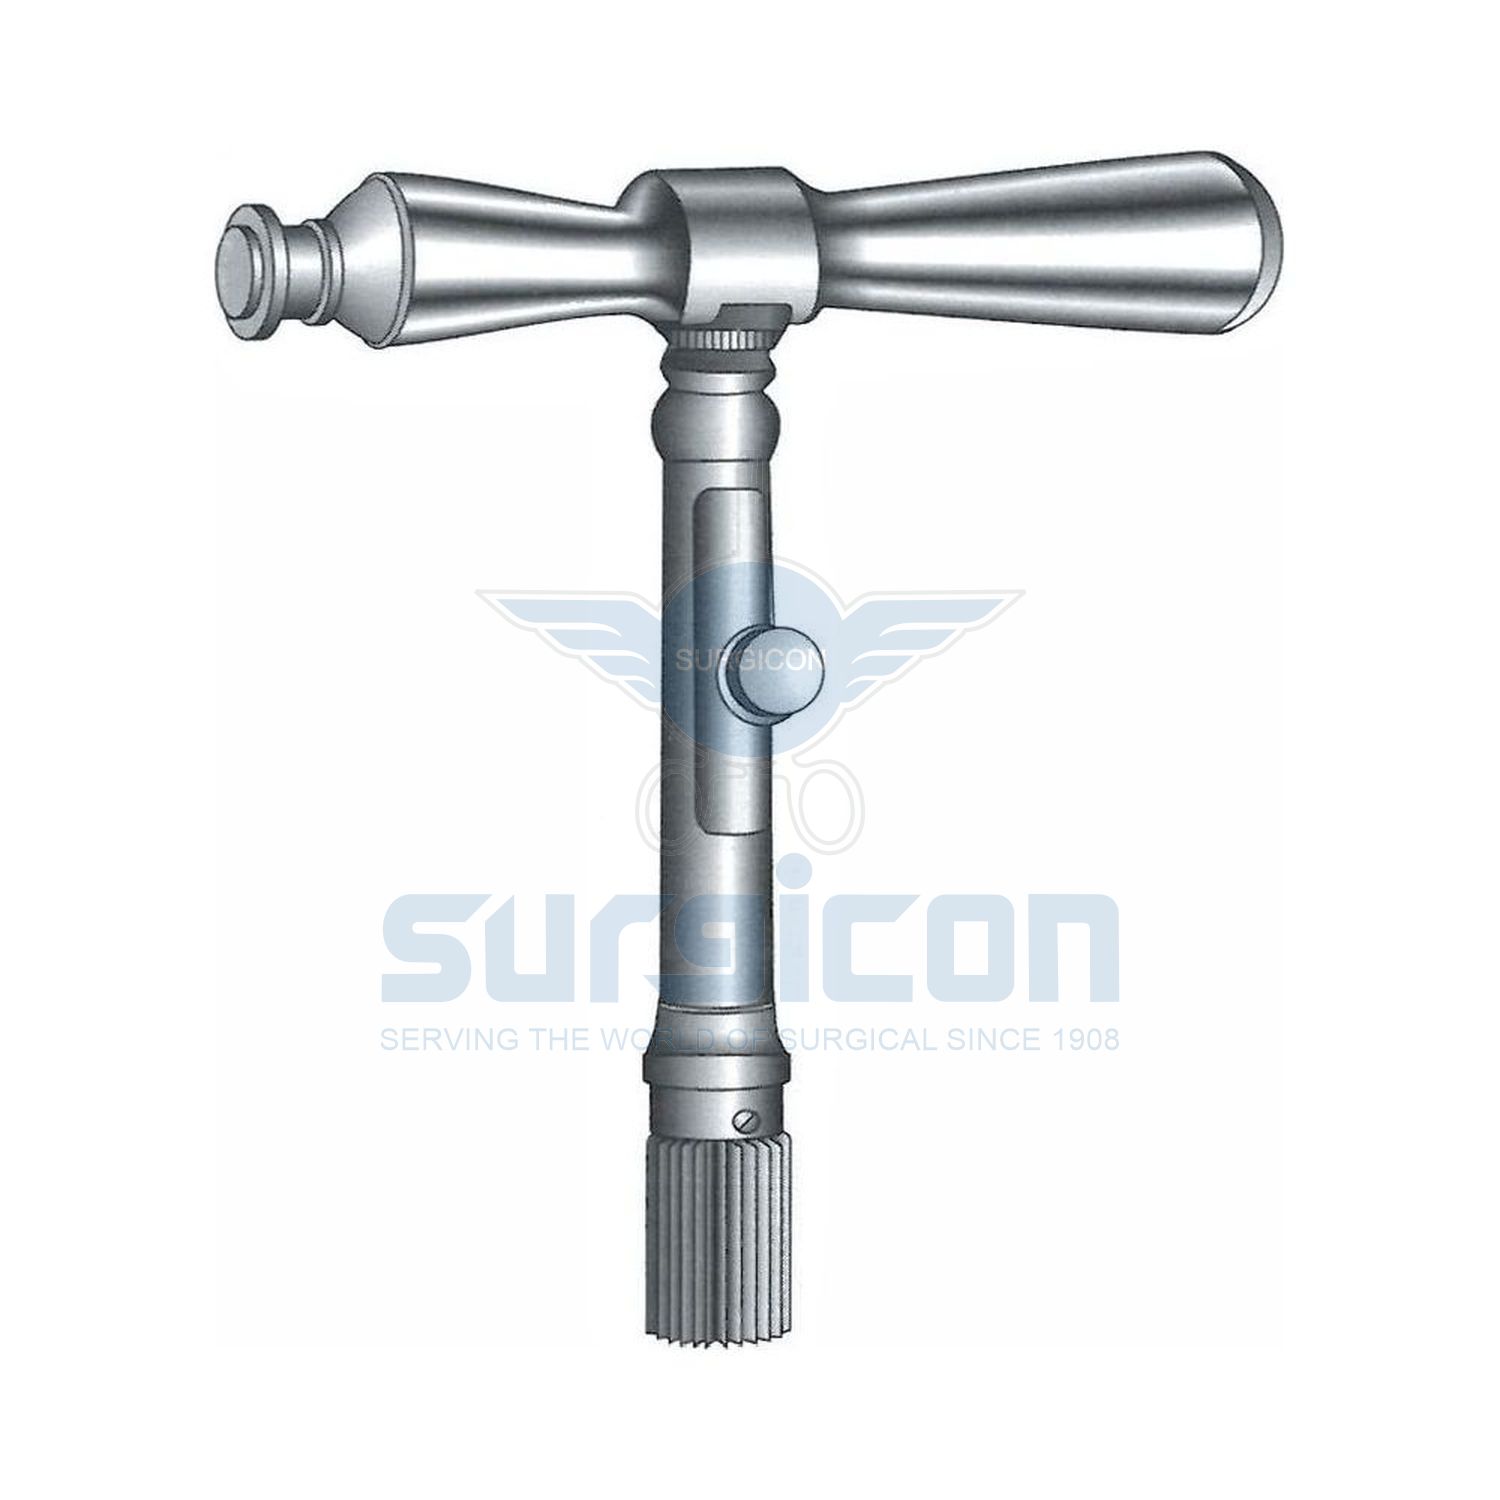 Hudson-Cervical-Traction-Tongs-and-Drill-Point-J-25-055